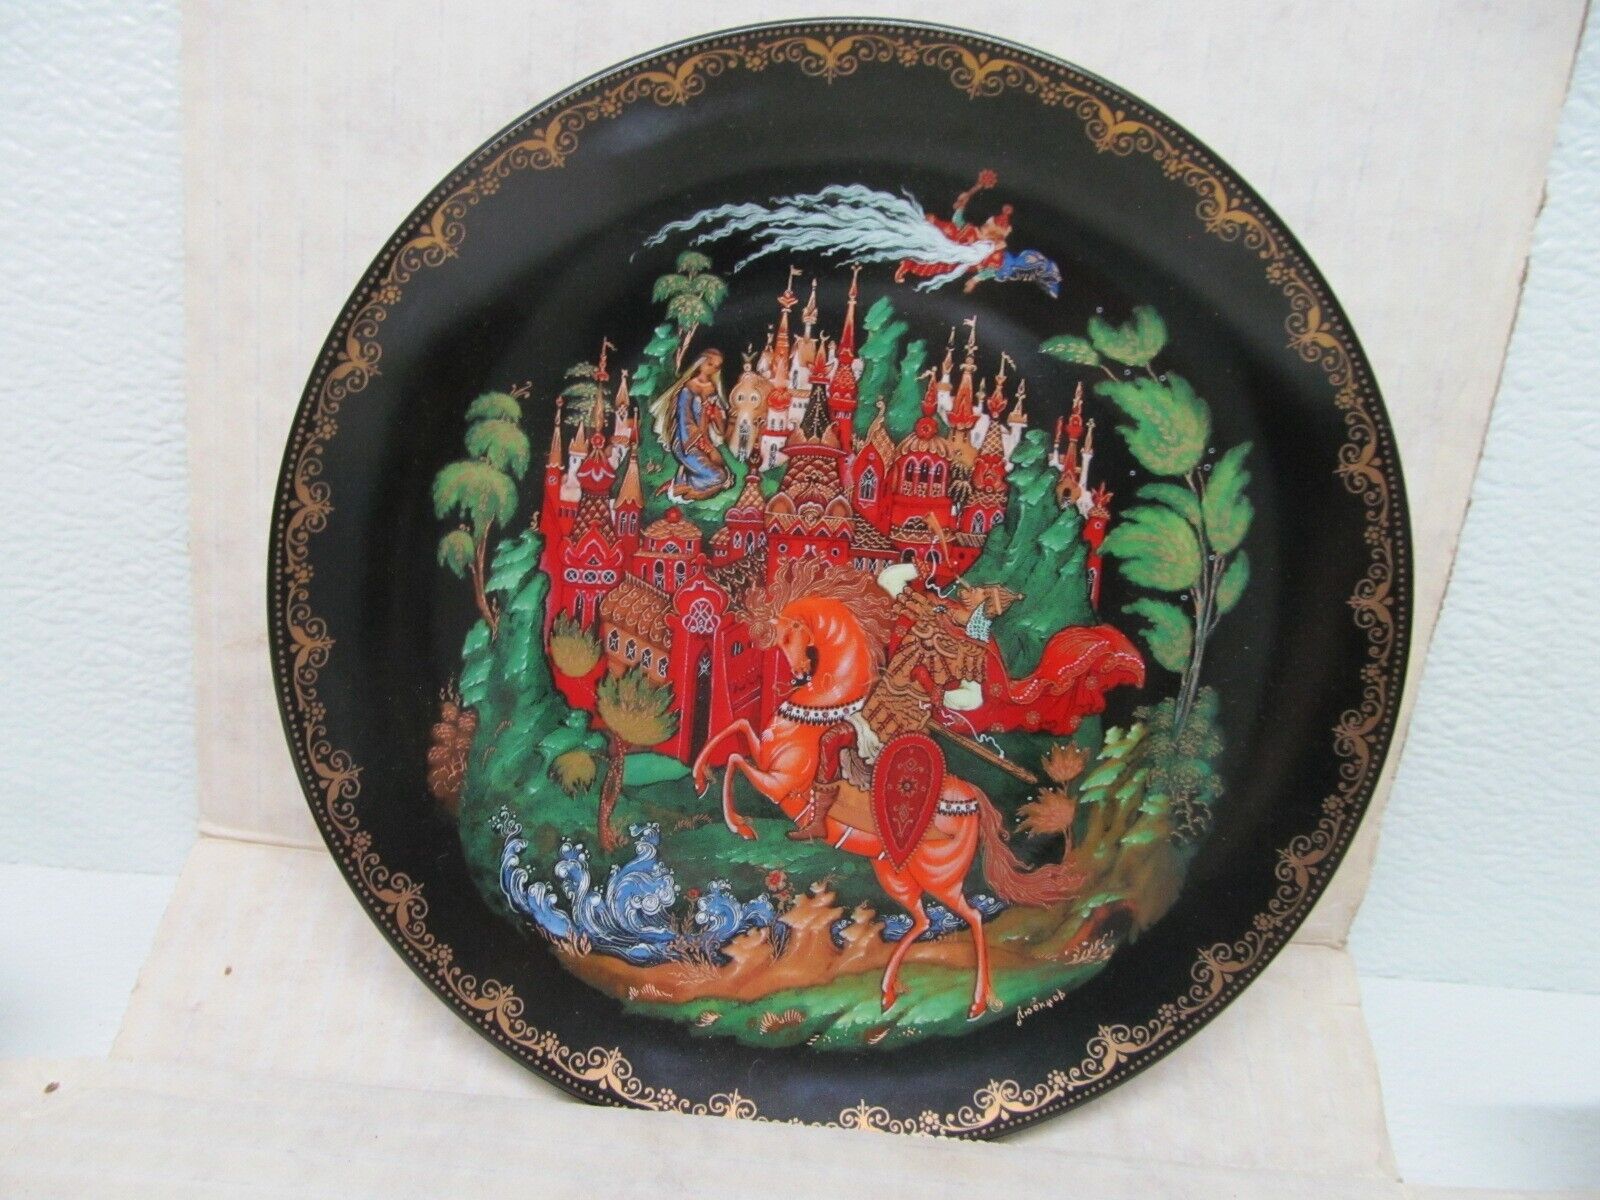 Russian Legends porcelain plate #1 Ruslan and Ludmila by Bradford Exchange